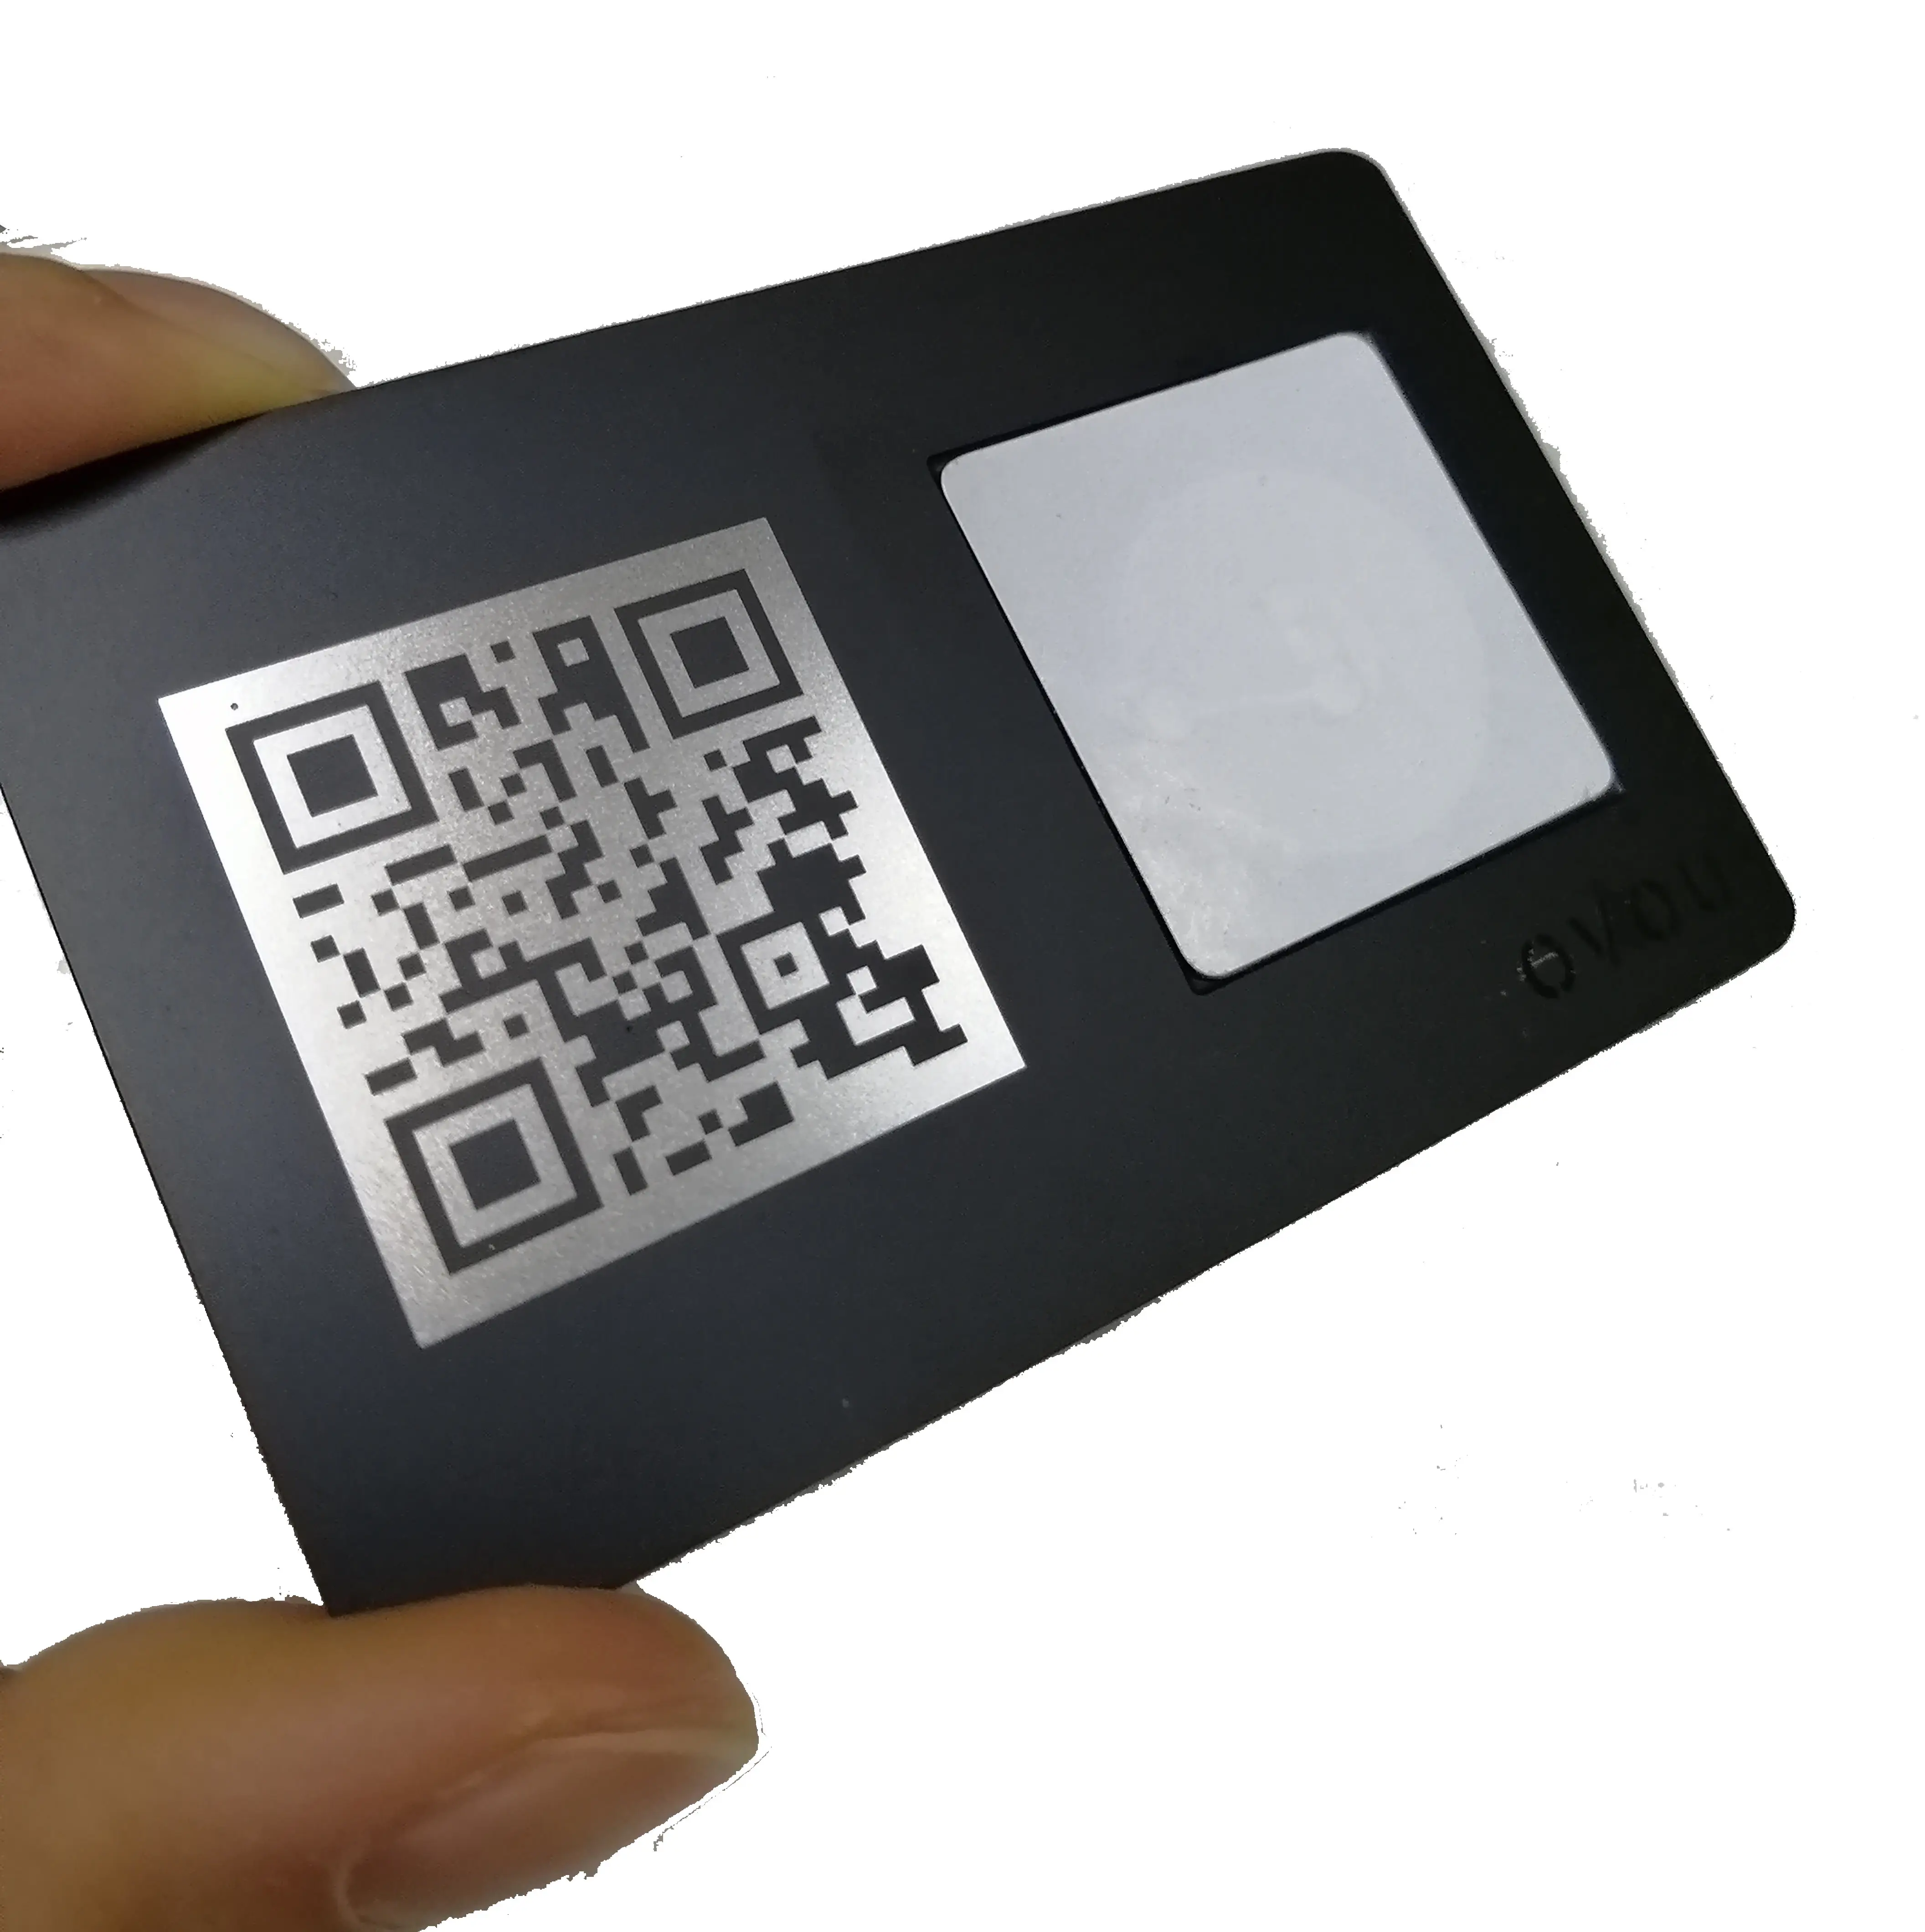 Rfid Nfc Card Tap to go nfc chip black metal business card for social media contact